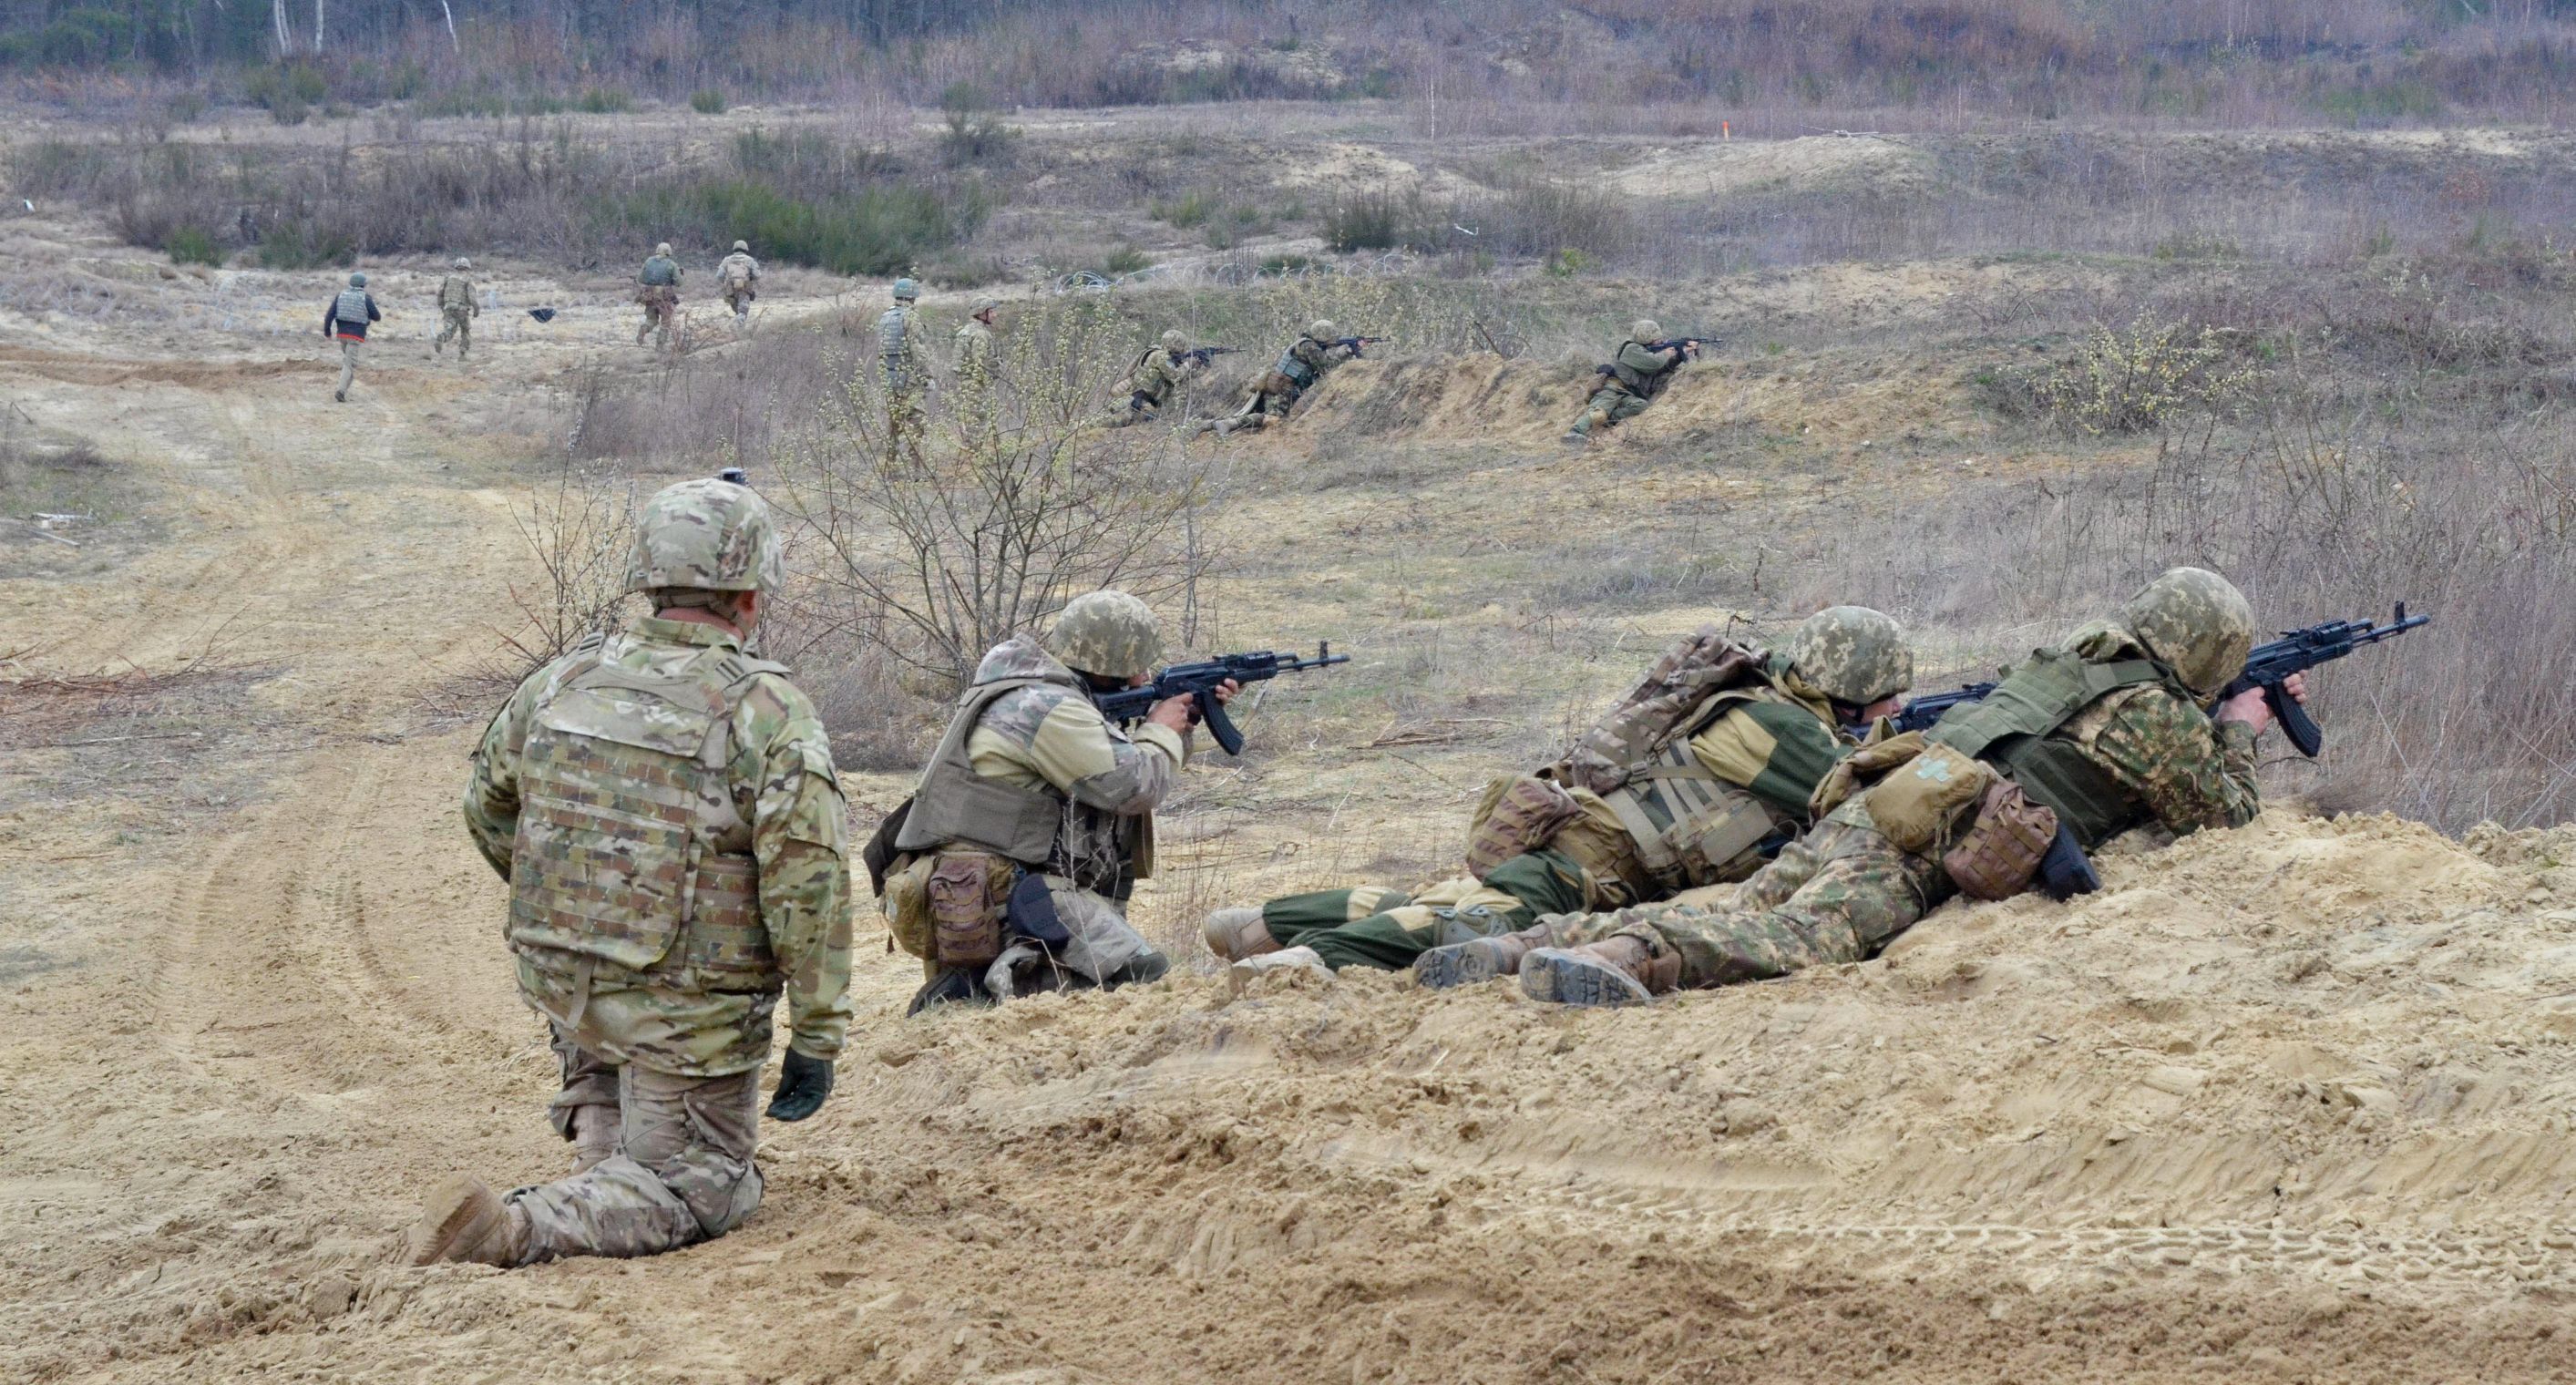 Soldiers with the 3rd Battalion, 15th Infantry Regiment, 2nd Infantry Brigade Combat Team, 3rd Infantry Division along with soldiers with the Ukrainian army conduct defensive operations